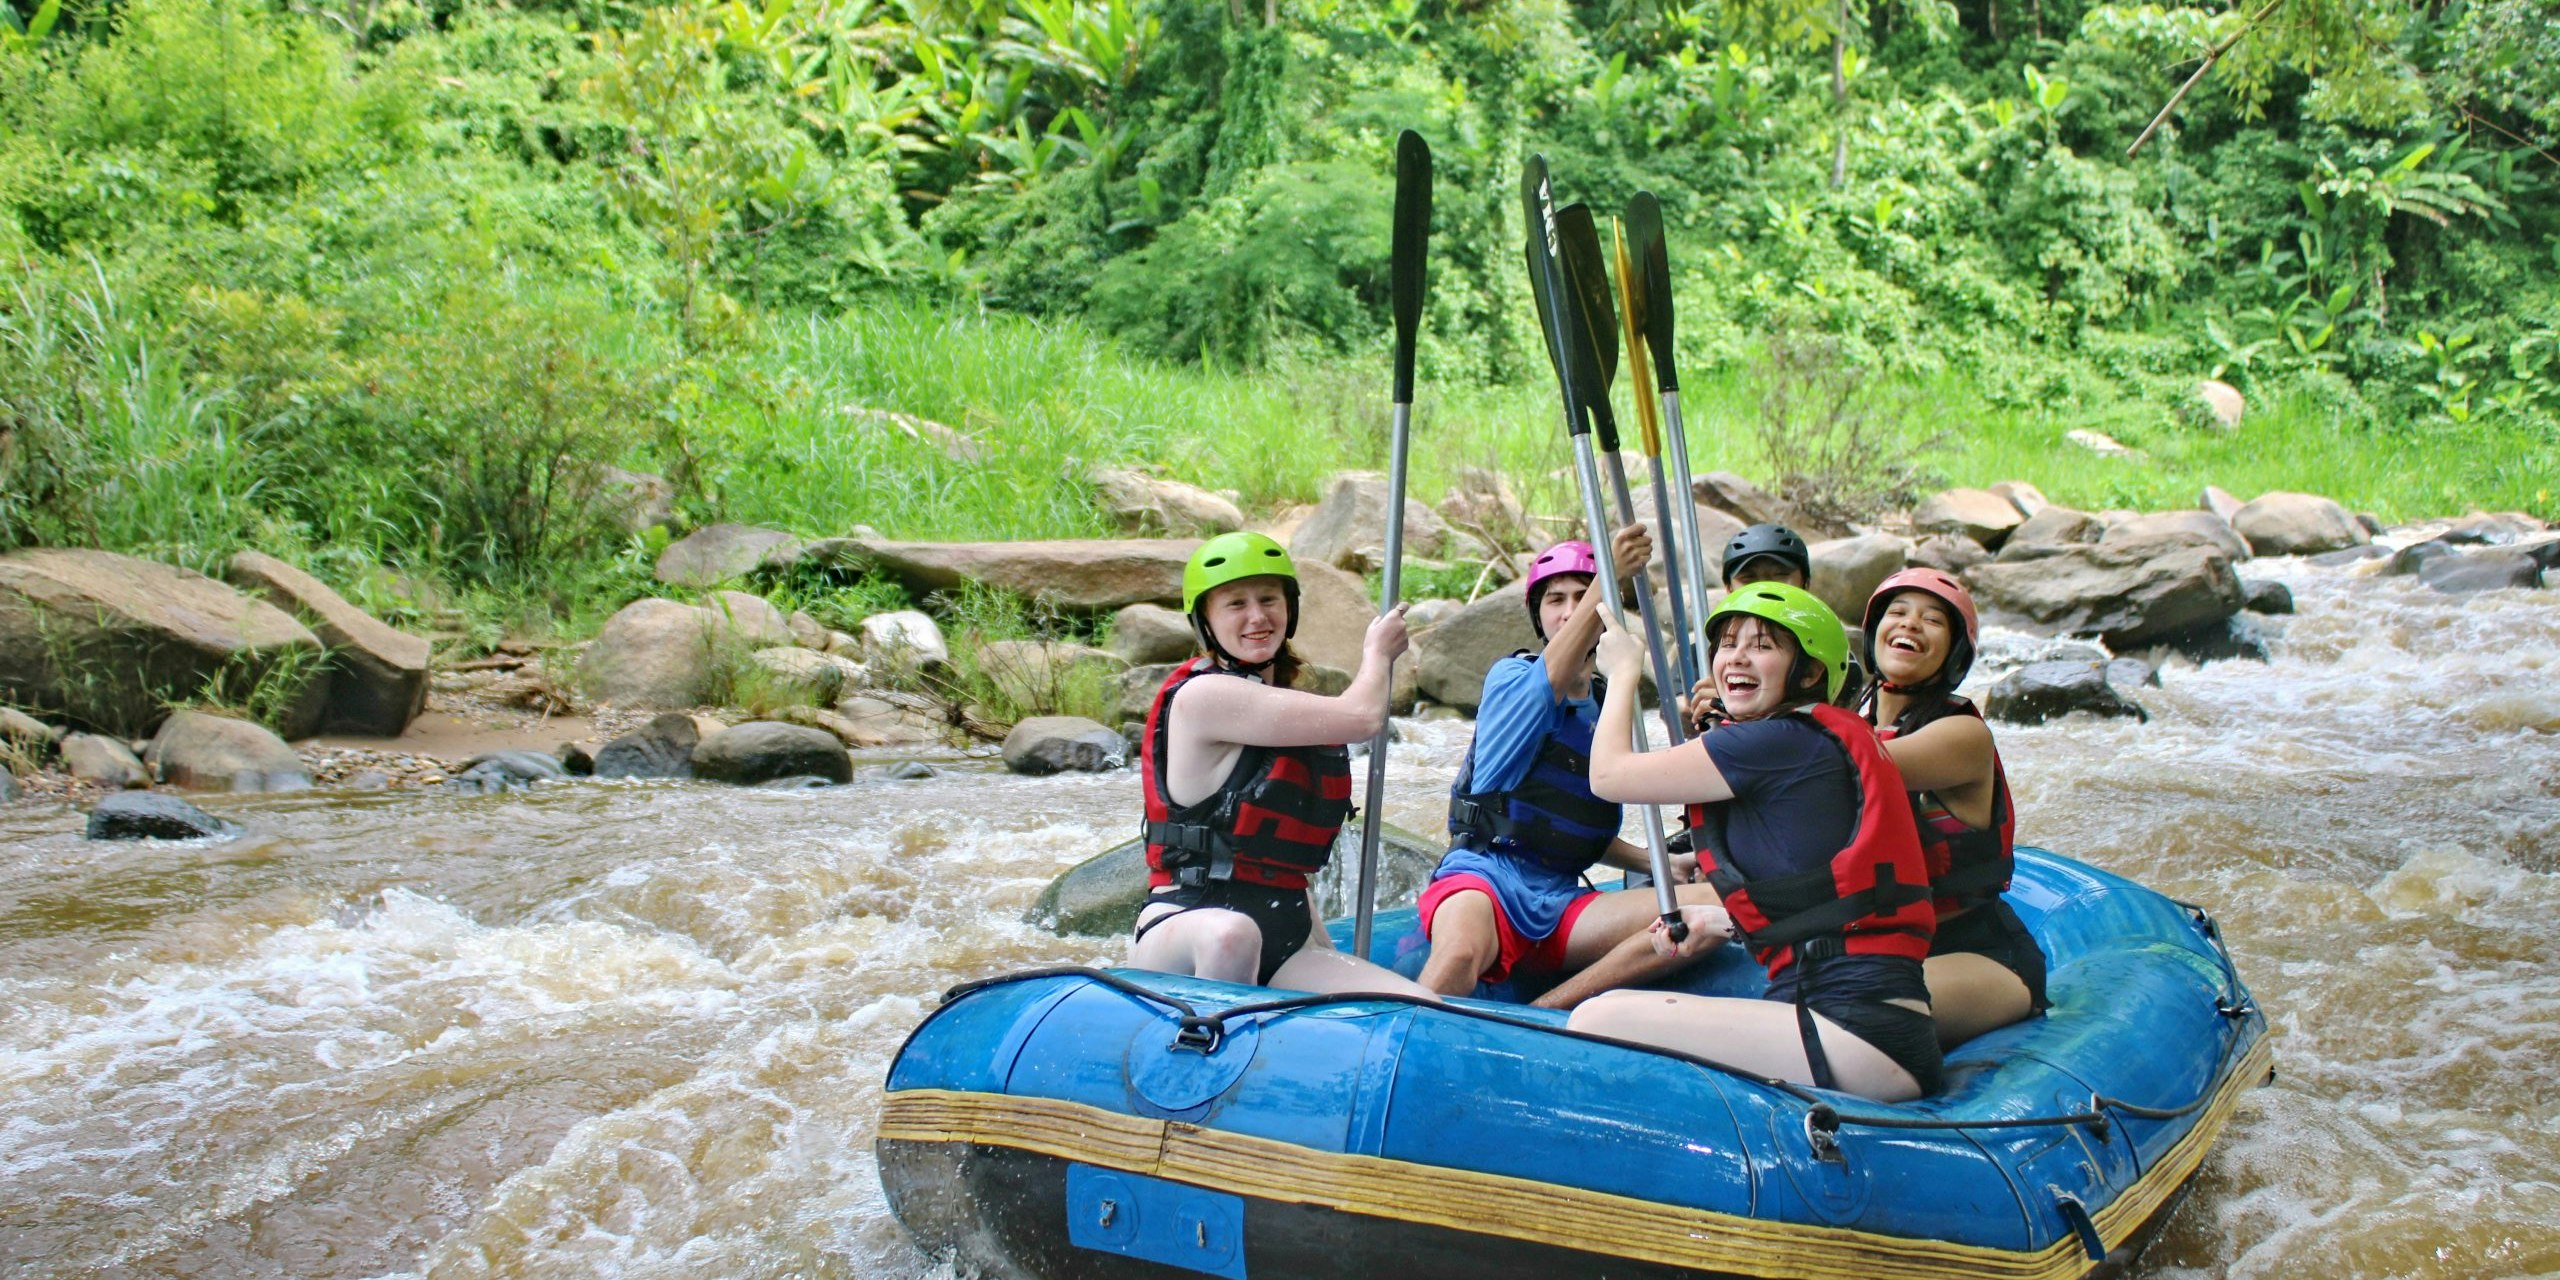 Thailand Travel: Updates from the Ultimate Service and Adventure Programs